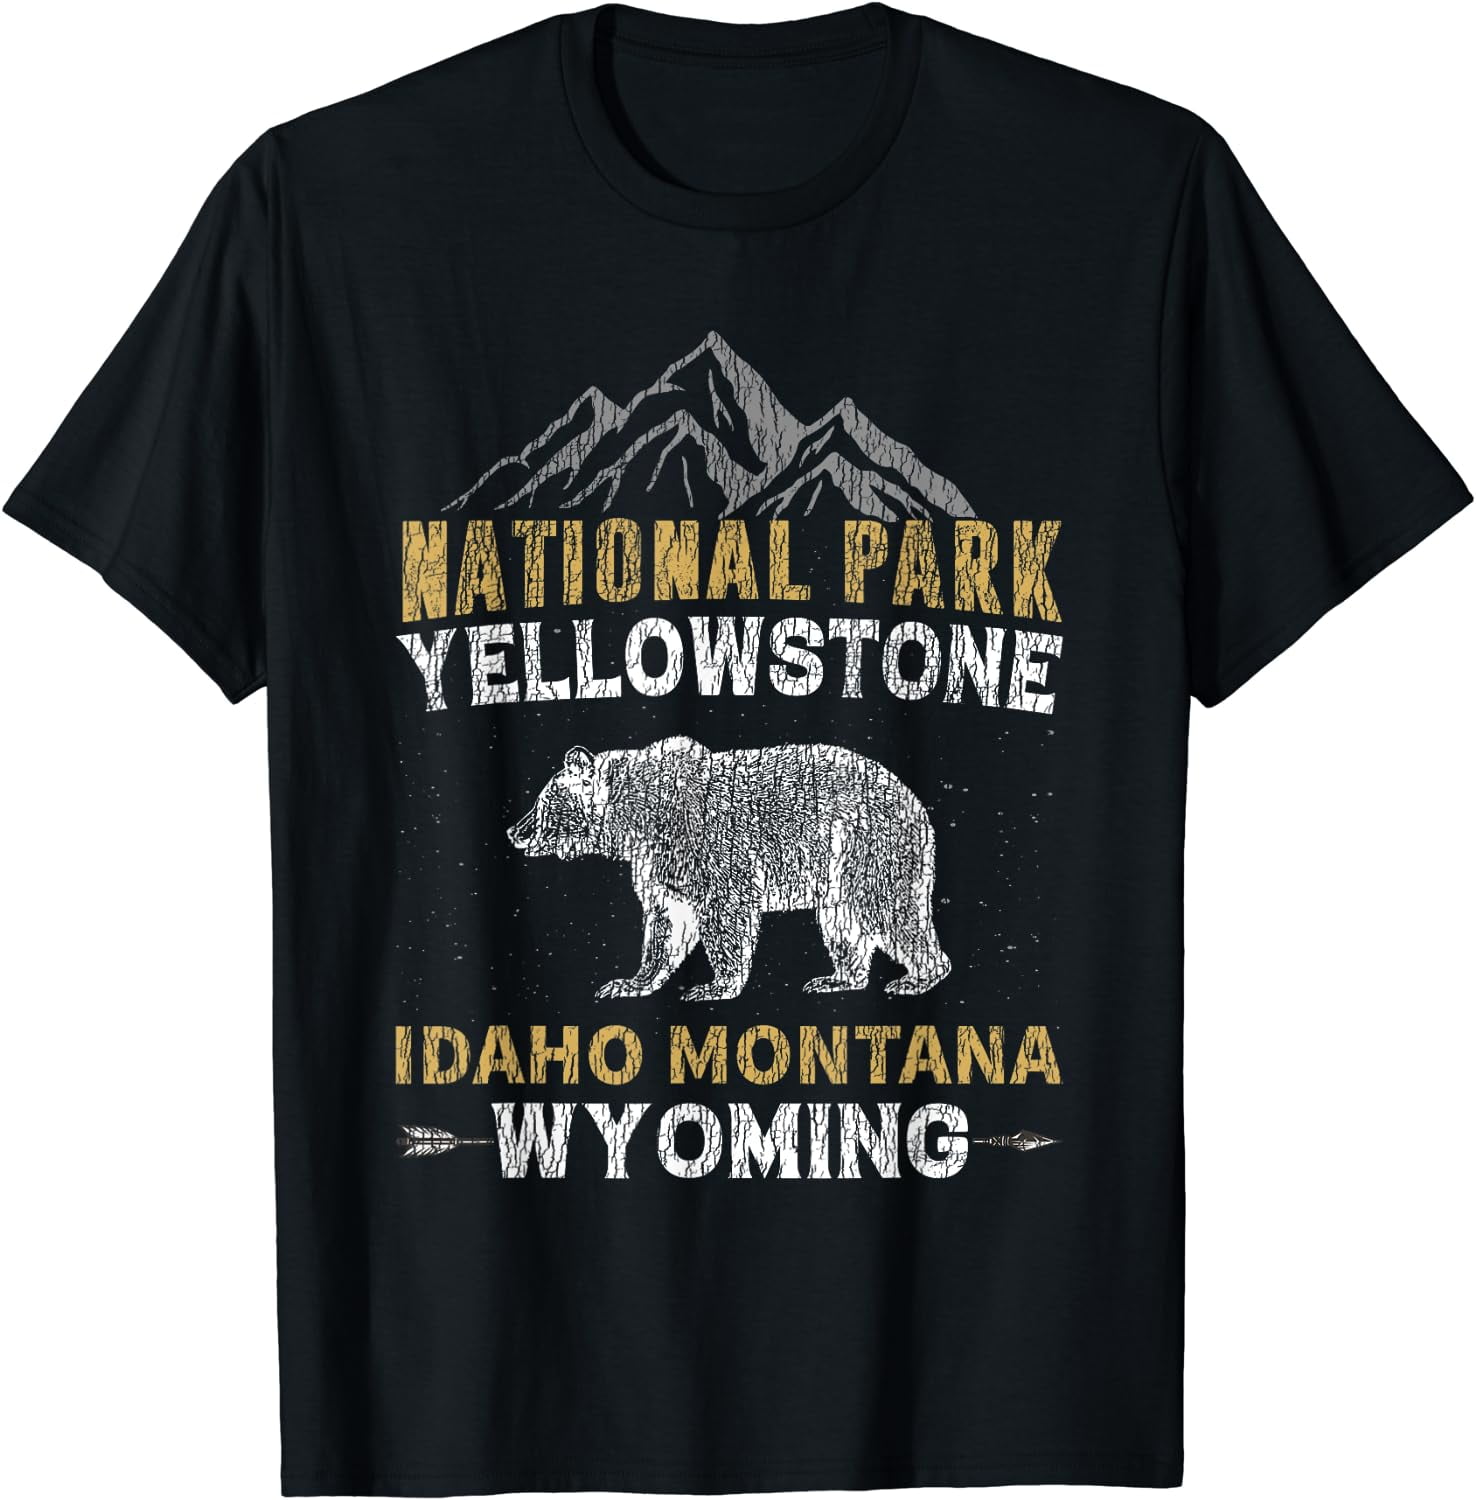 Vintage Grizzly Bear Hiking Camper Yellowstone National Park T-Shirt ...